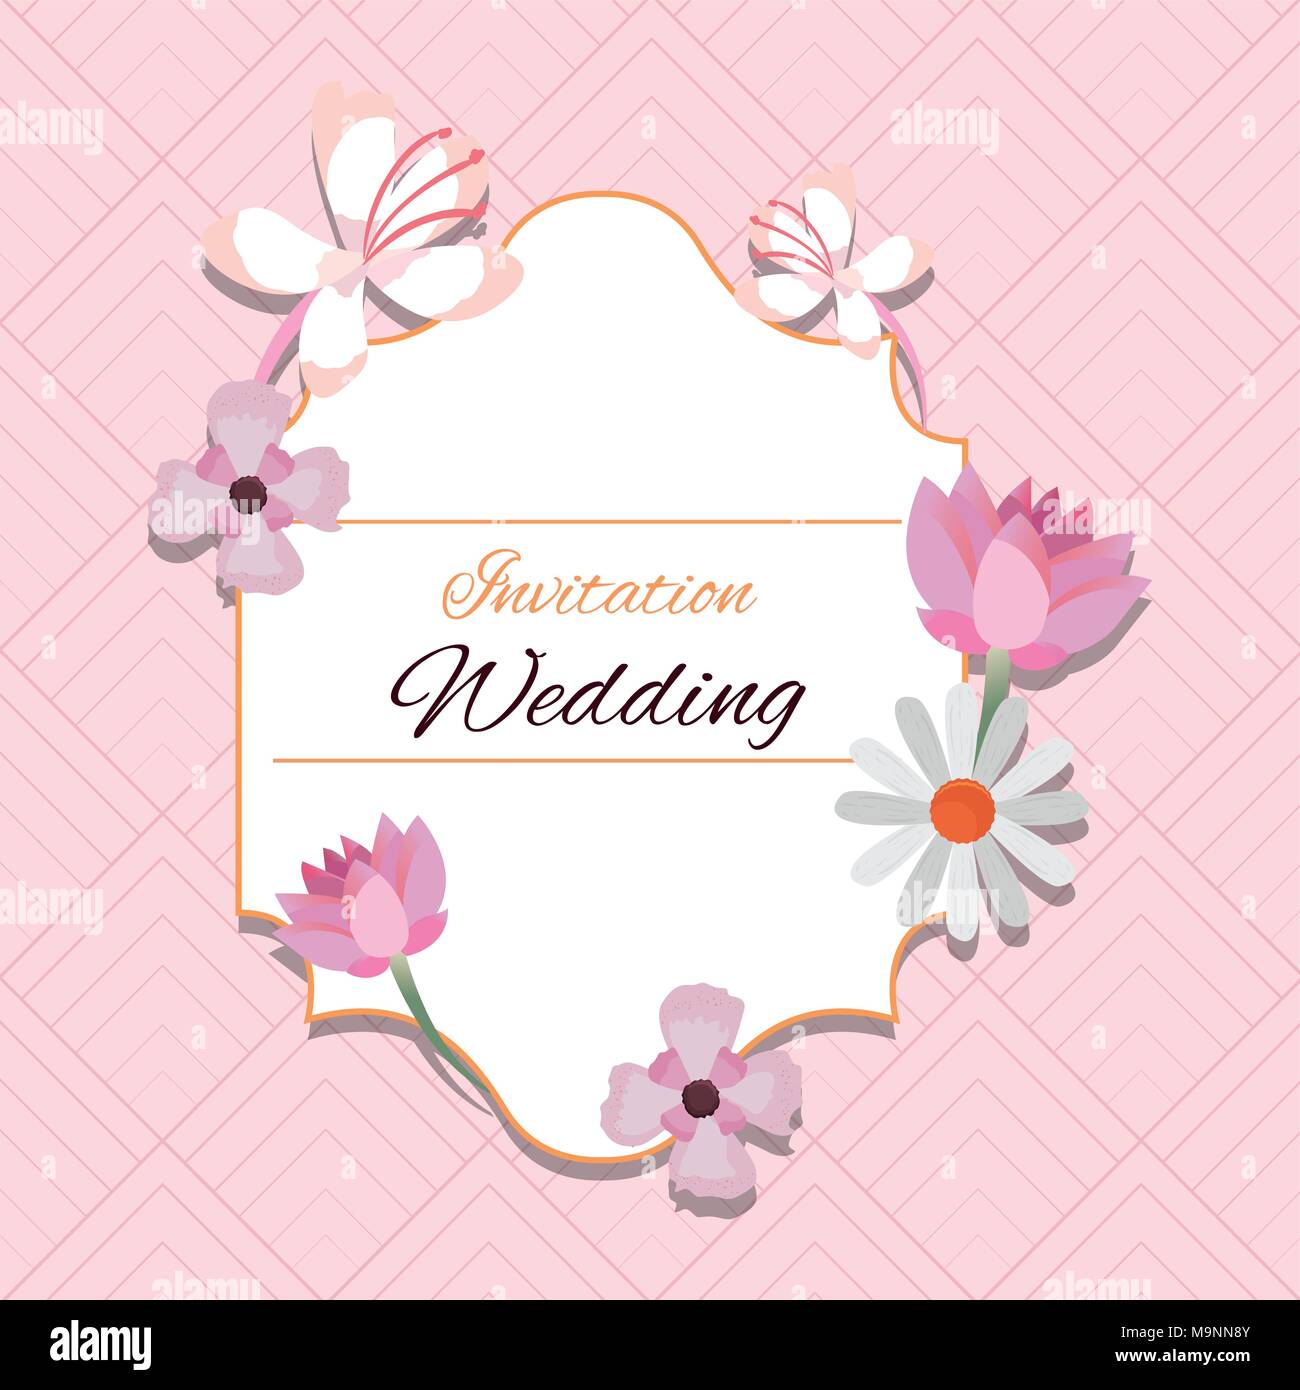 floral wedding invitation design with beautiful flowers and decorative frame over pink background, colorful design. vector illustration Stock Vector